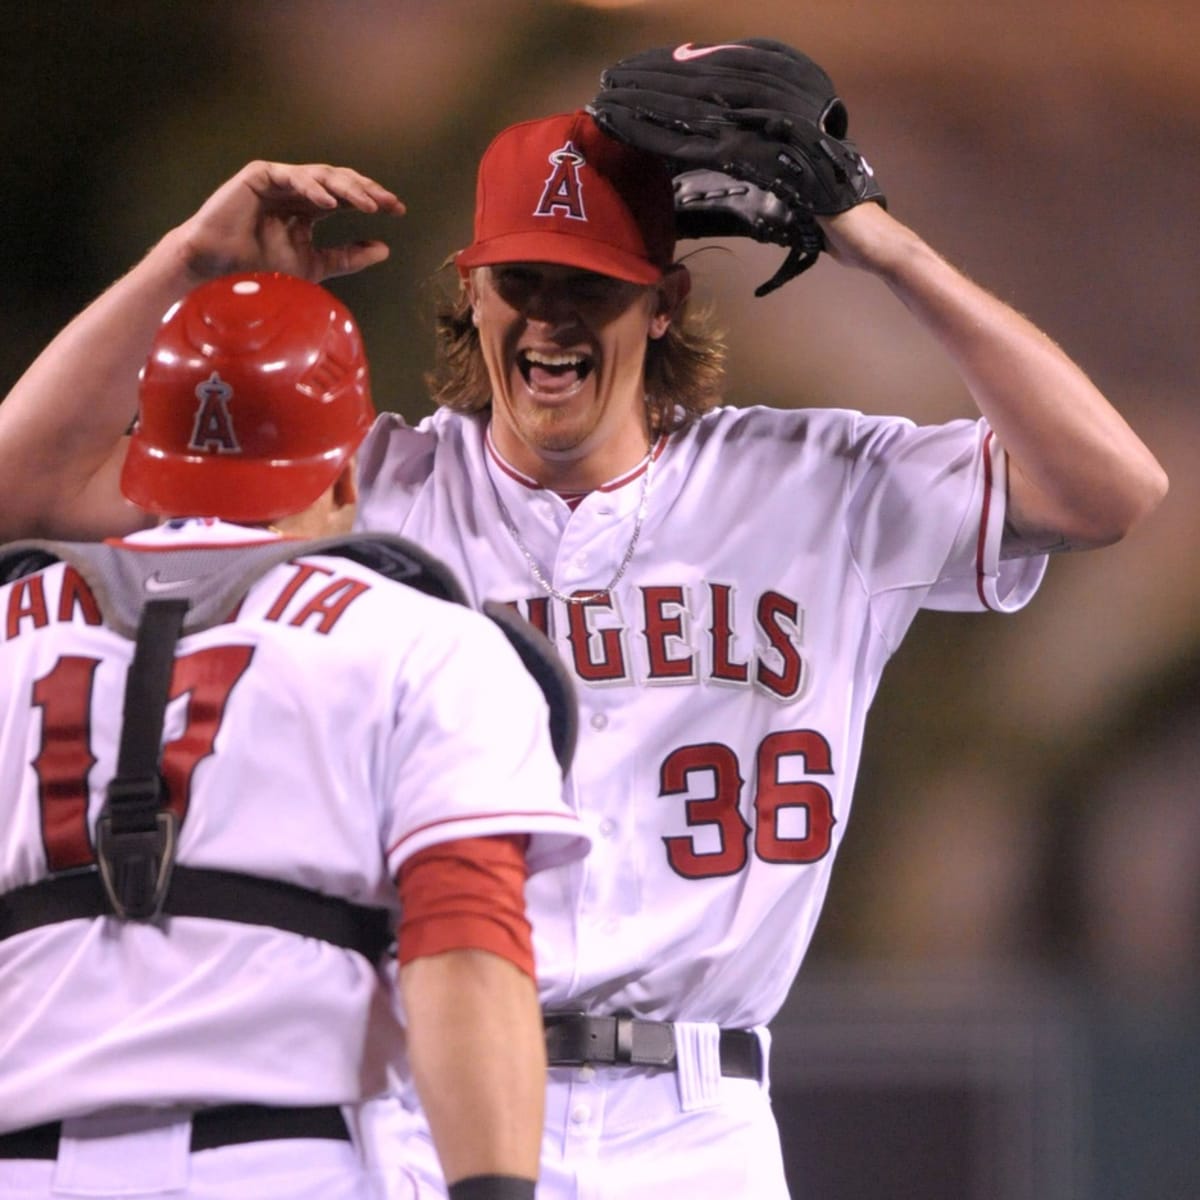 Jered Weaver doubts number will be retired, should it be?